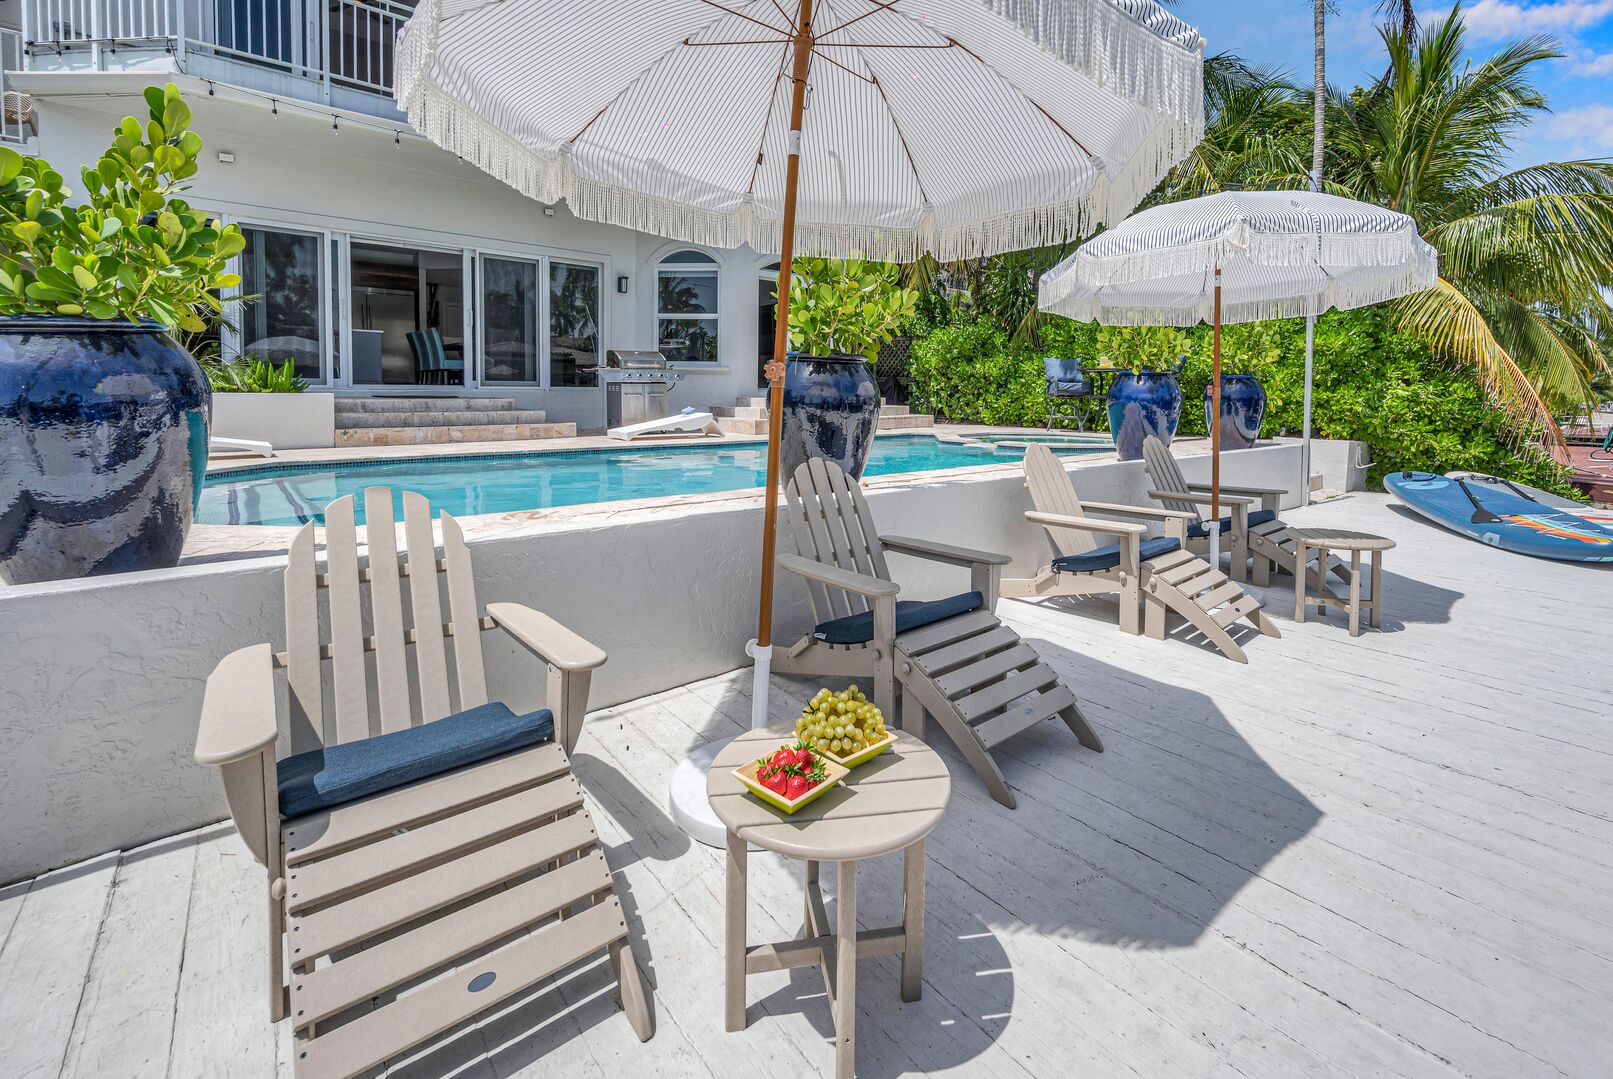 Enjoy the waterfront tranquility from the lounge areas and heated pool with its lounge pool